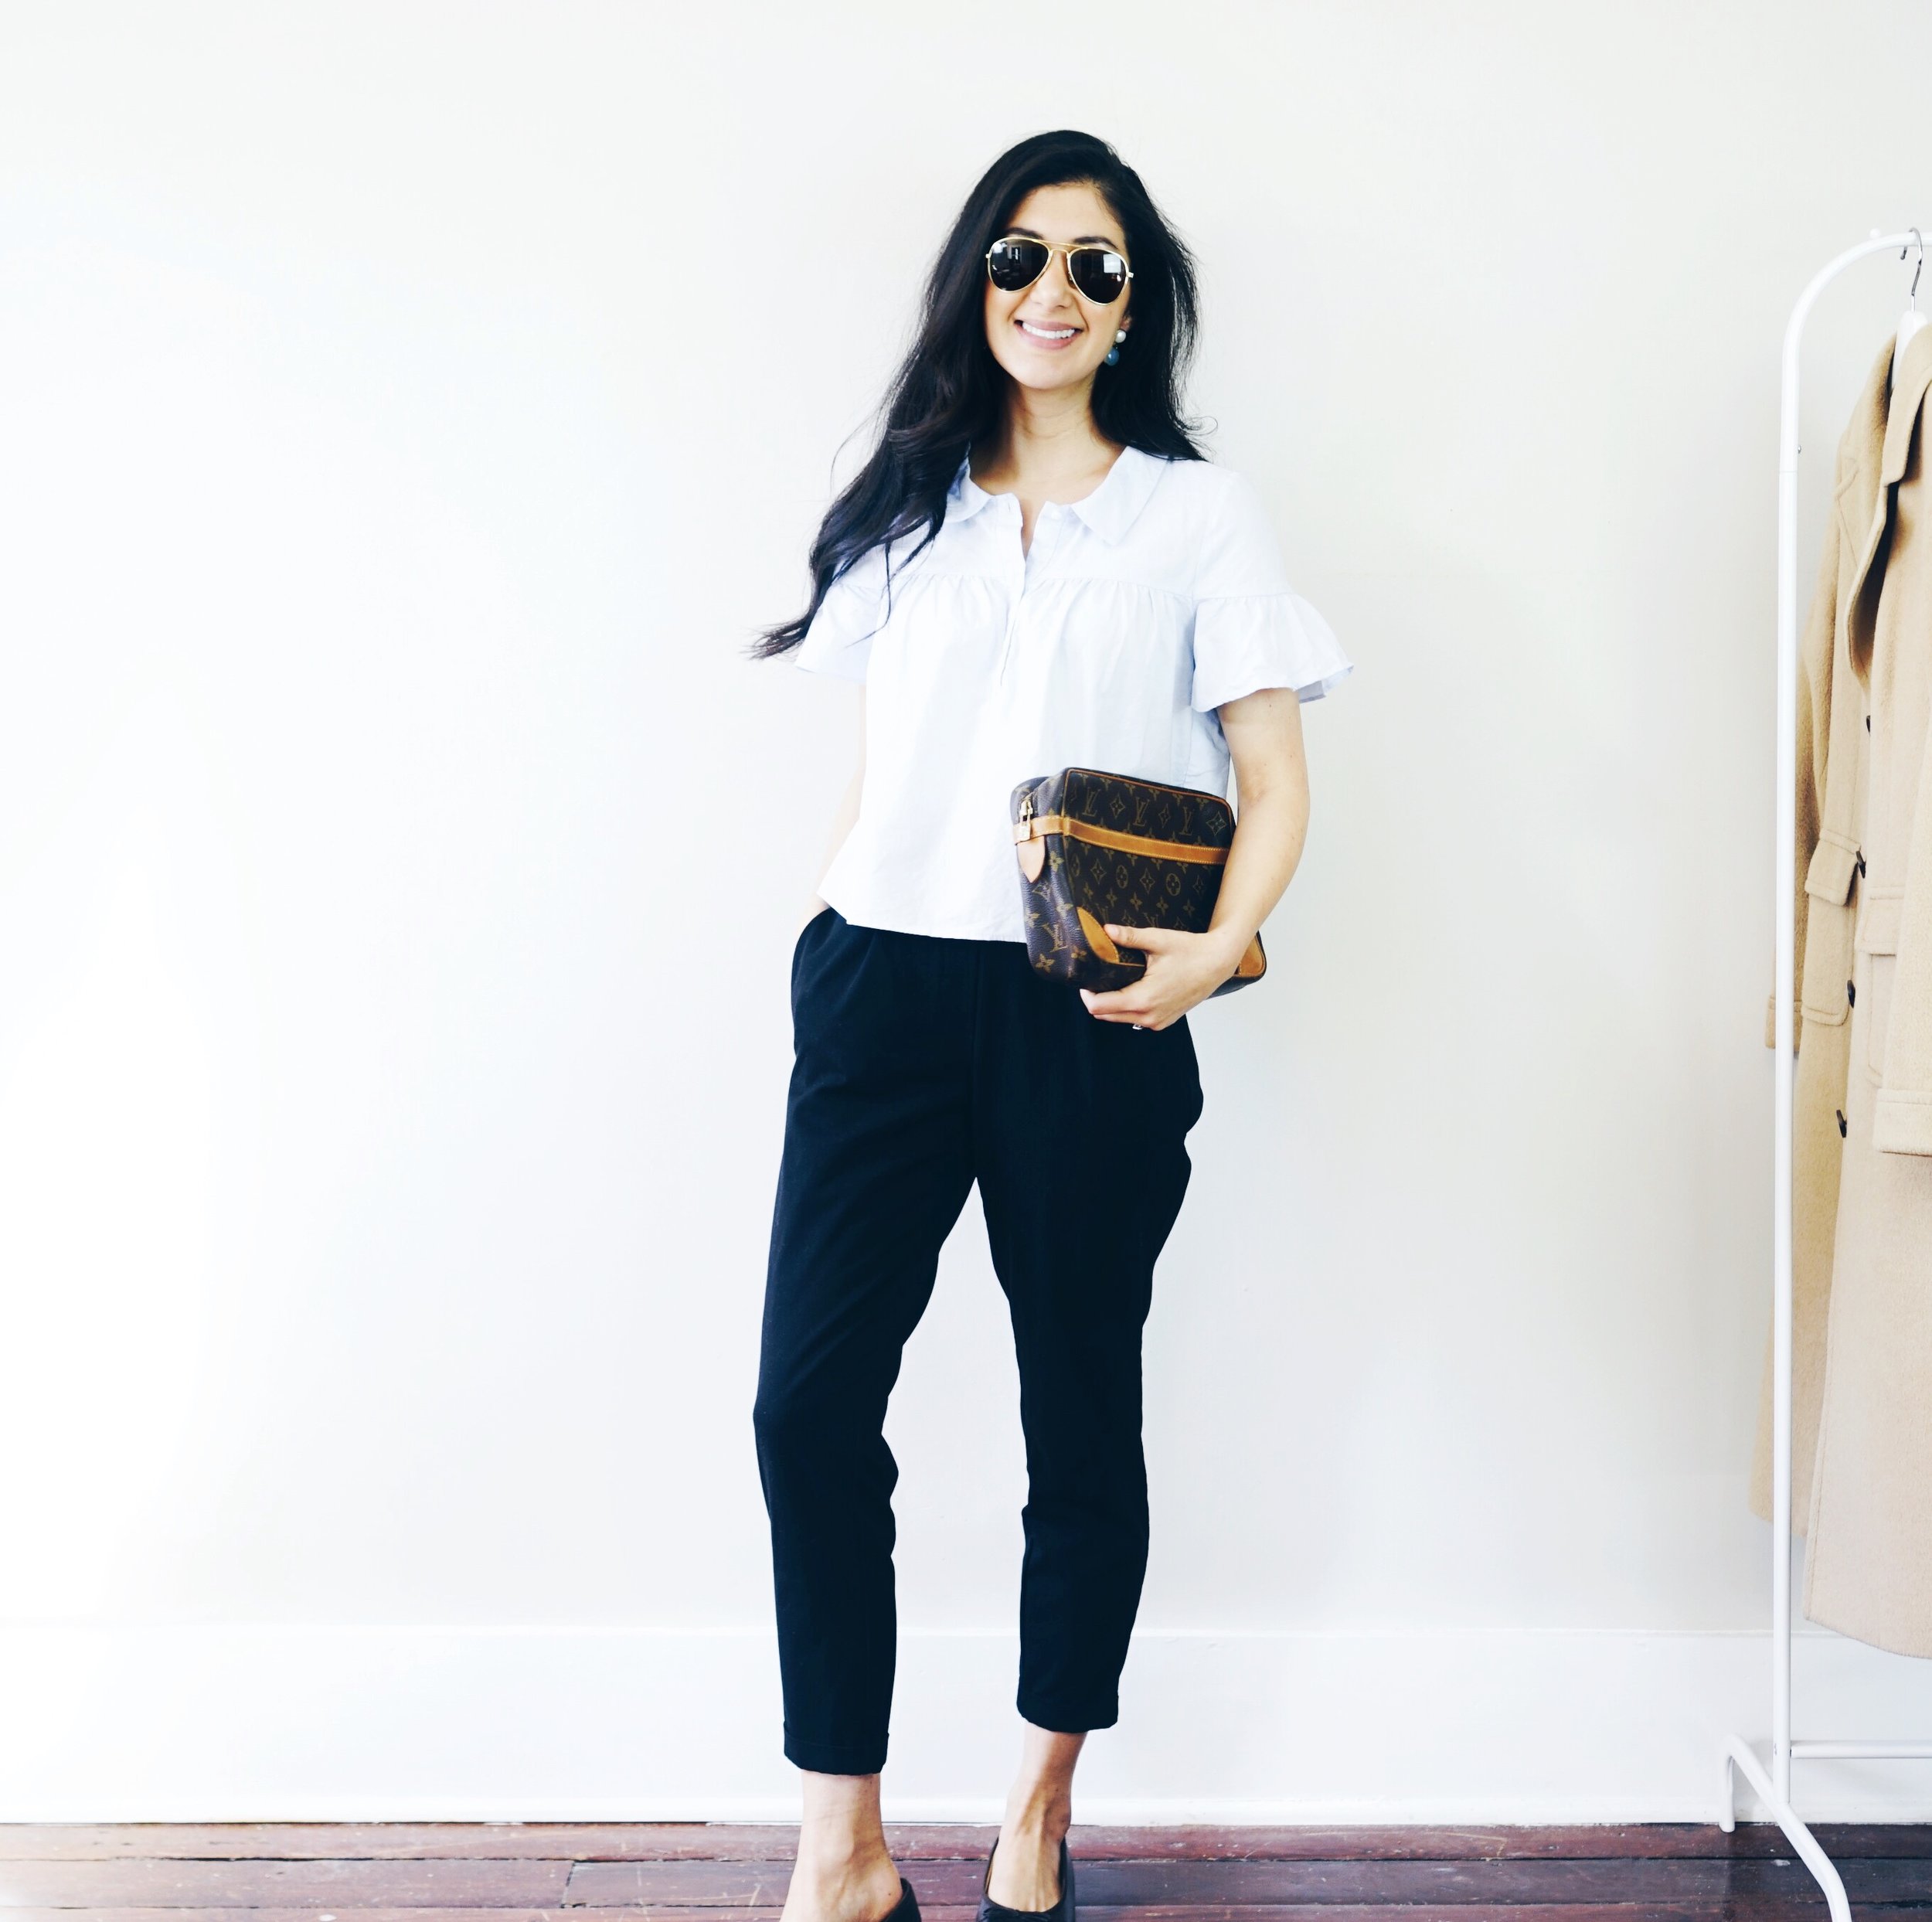 How To Style Black Pants 4 Ways: Project 1-4-4 - ABOUT How To Style ...